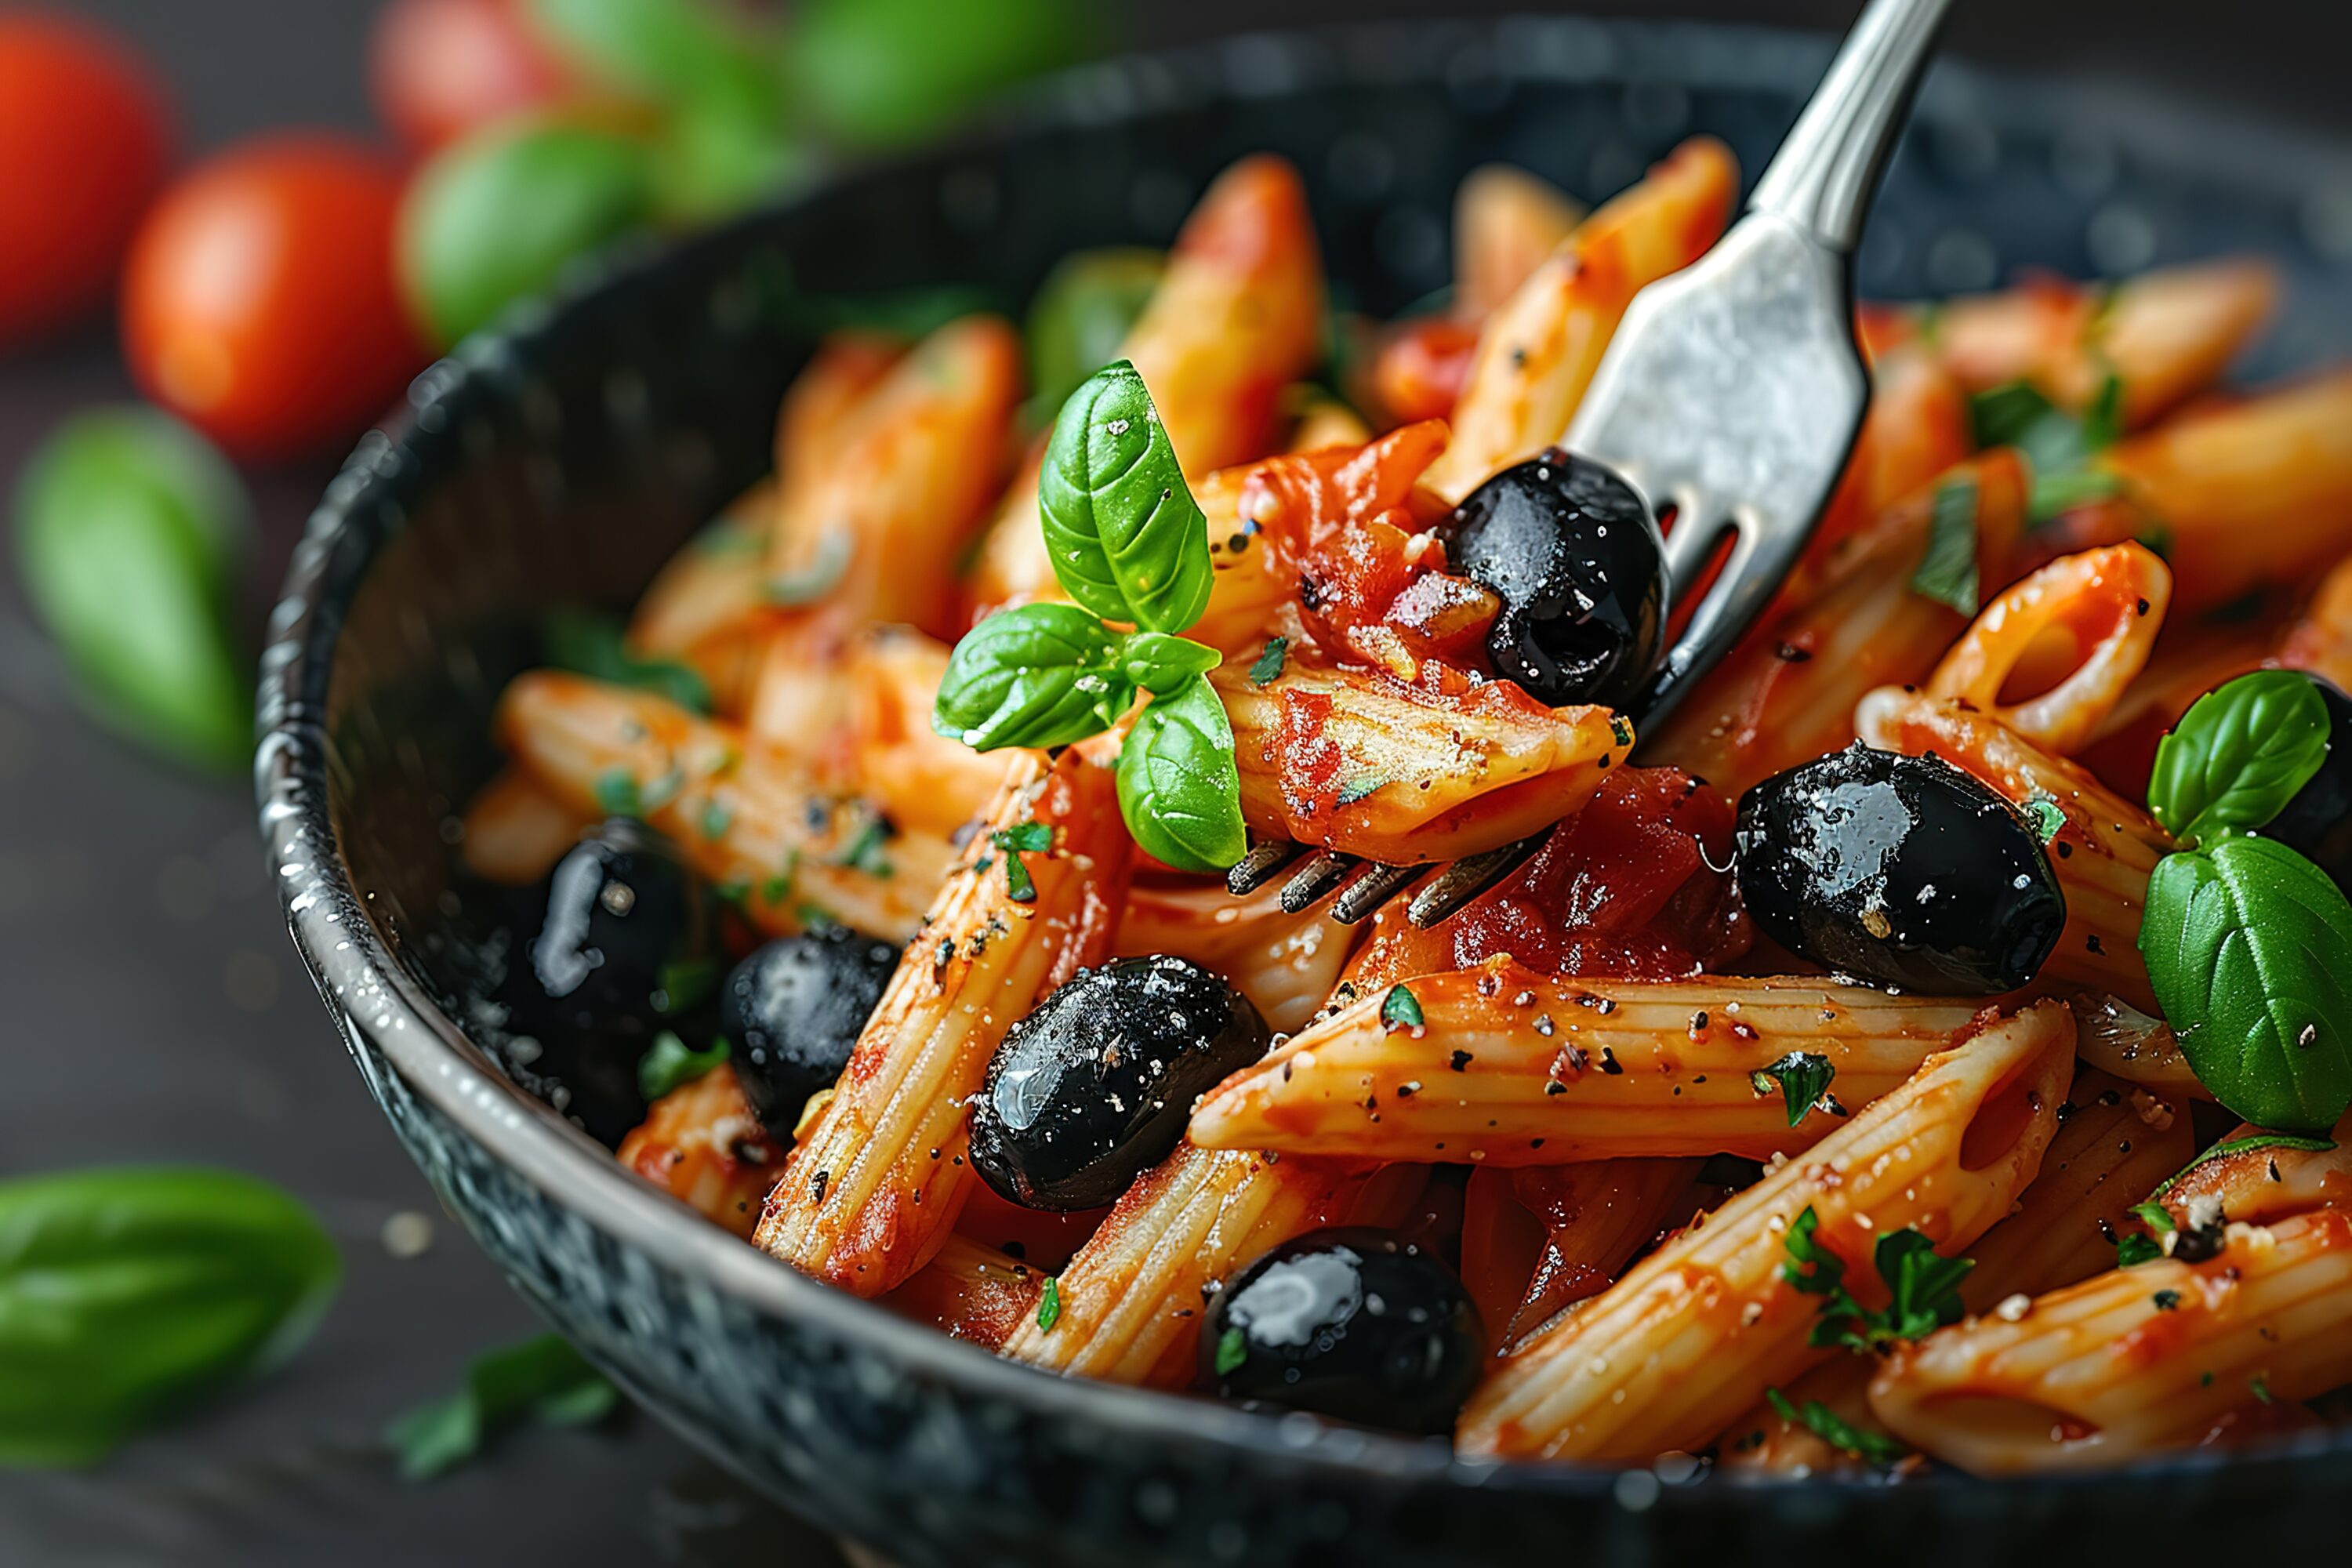 penne-pasta-with-arrabbiata-rose-sauce-and-black-olives-with-a-backdrop-of-fresh-green-leaves-and-a-grey-table-cloth